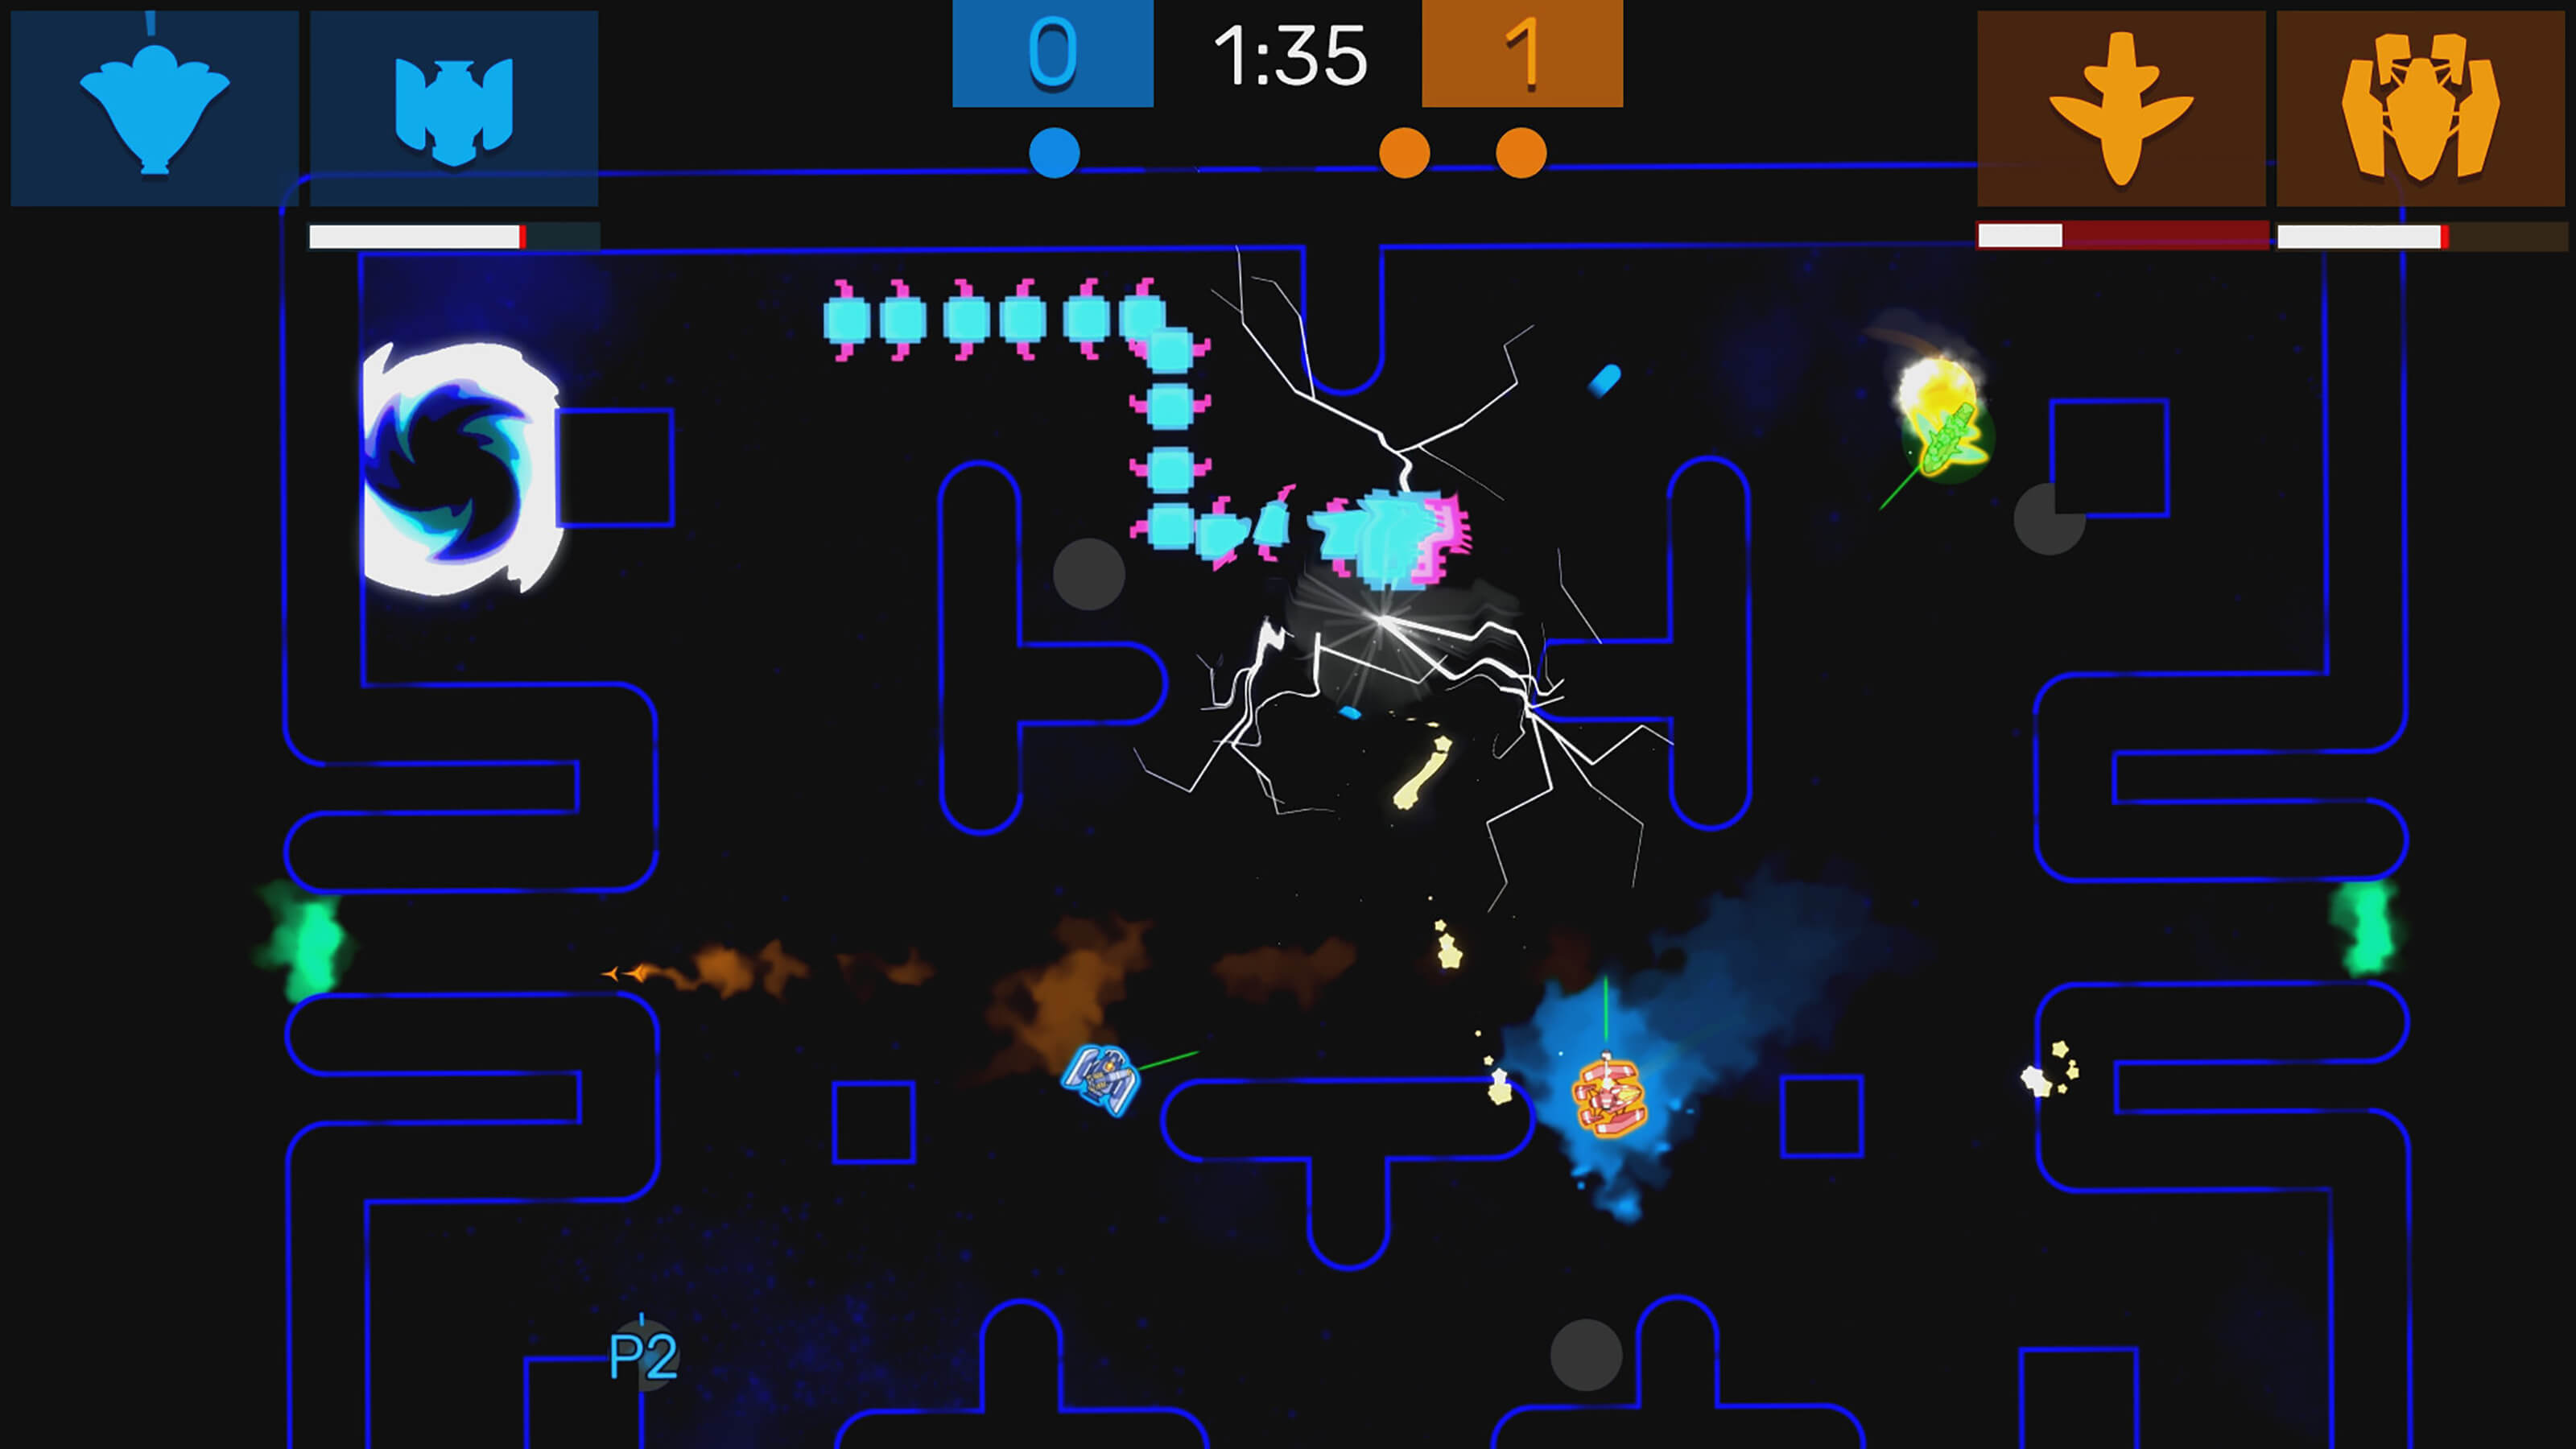 A turquoise centipede travels through a blue Pac-Man-like playing field surrounded by the players.